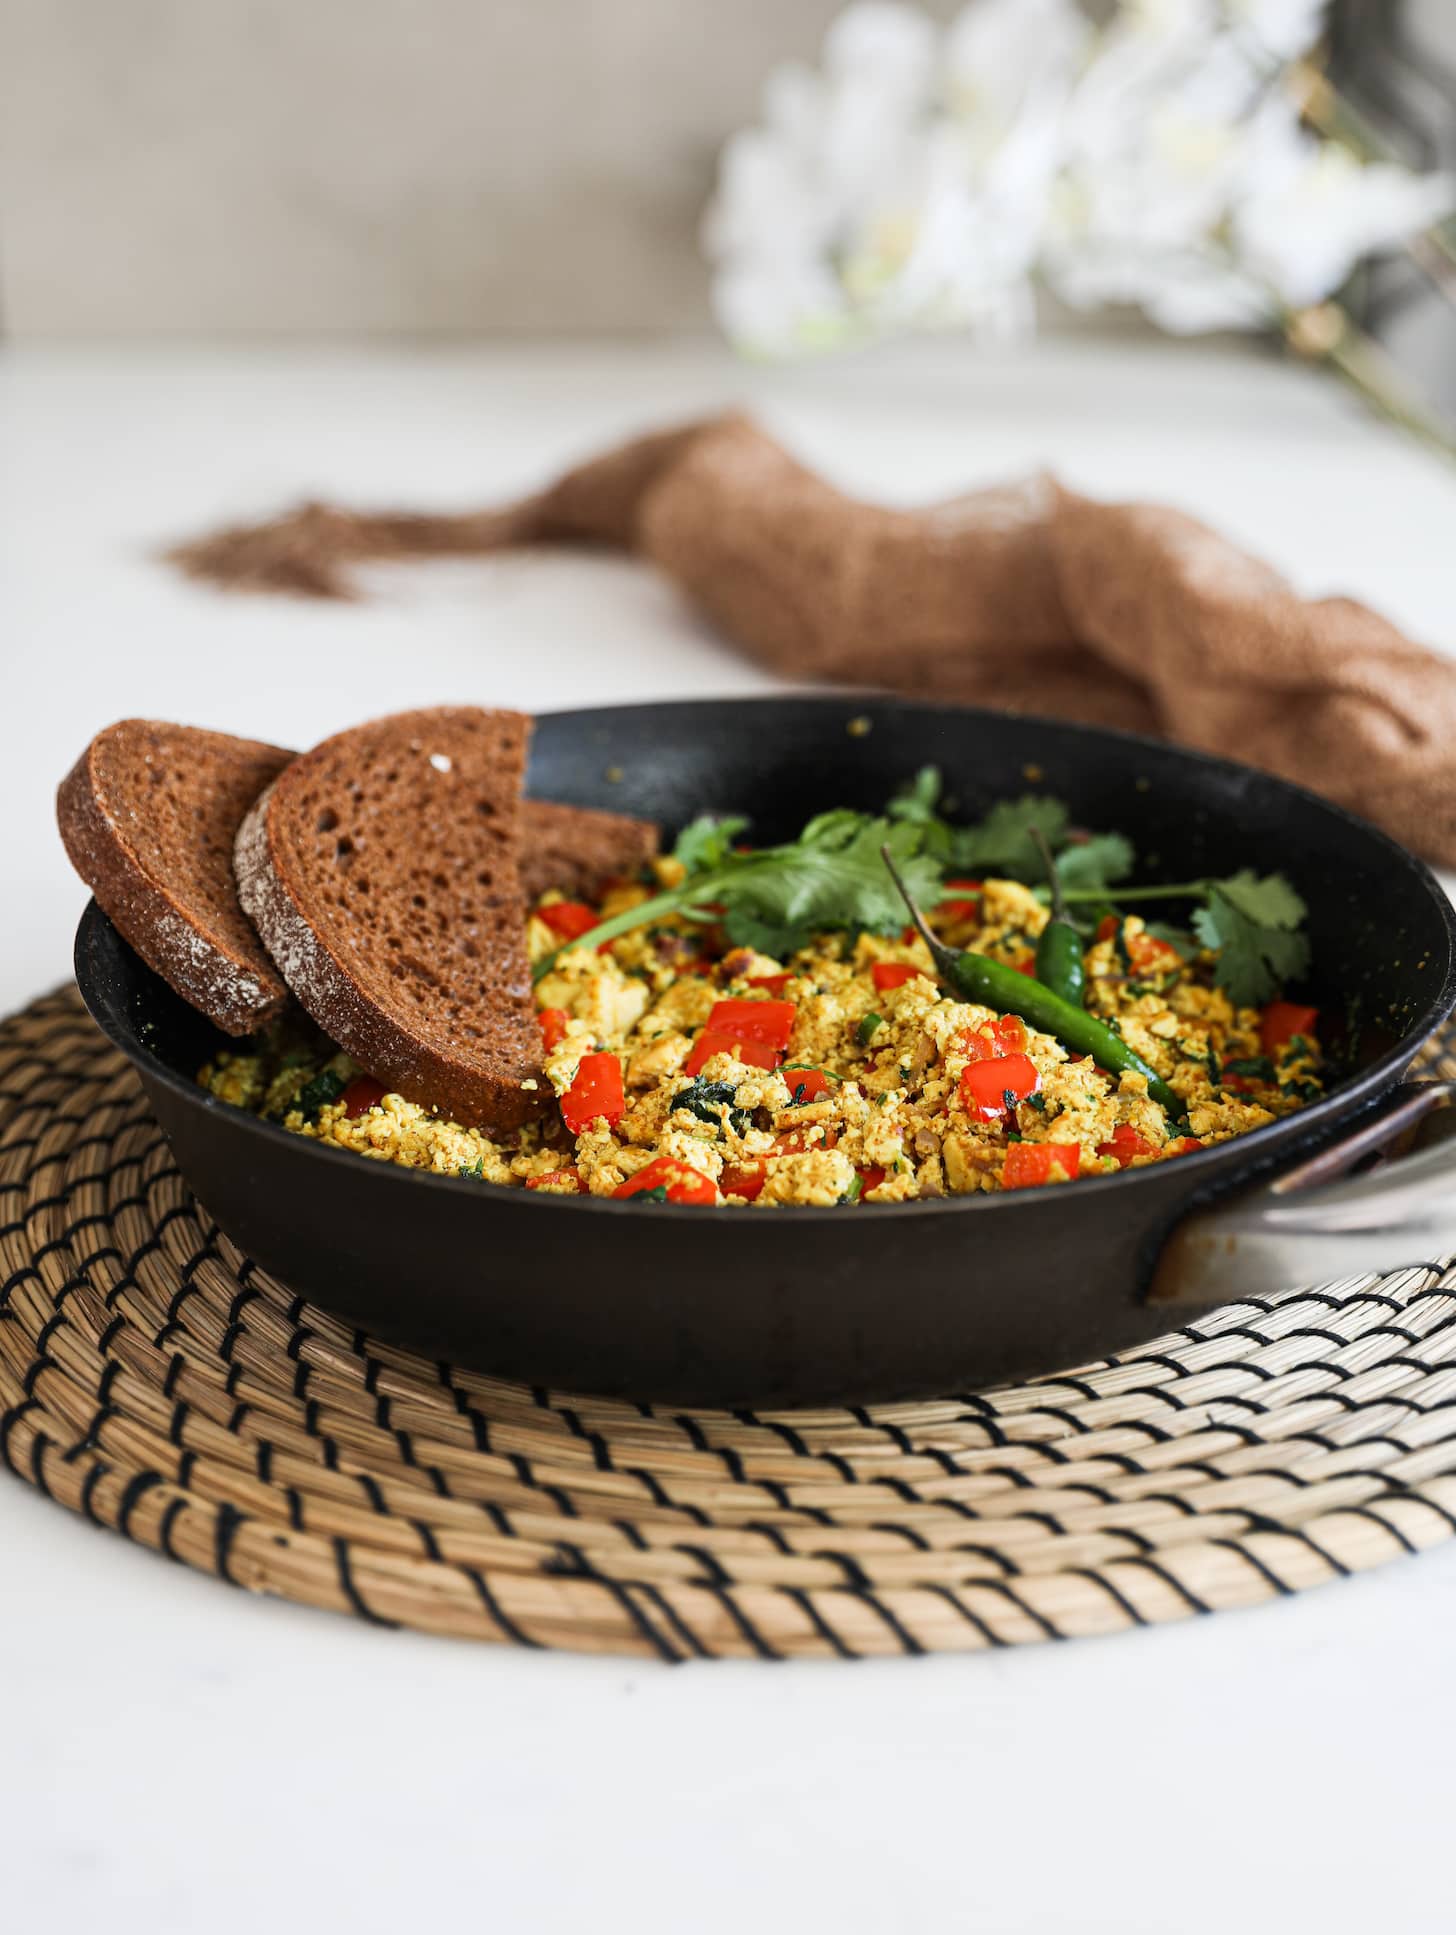 Perspective image of a fry pan of scramble with red pepper cubes topped with cilantro and green chilli and two slices of pumpernickel bread placed on top. There are flowers in the background.